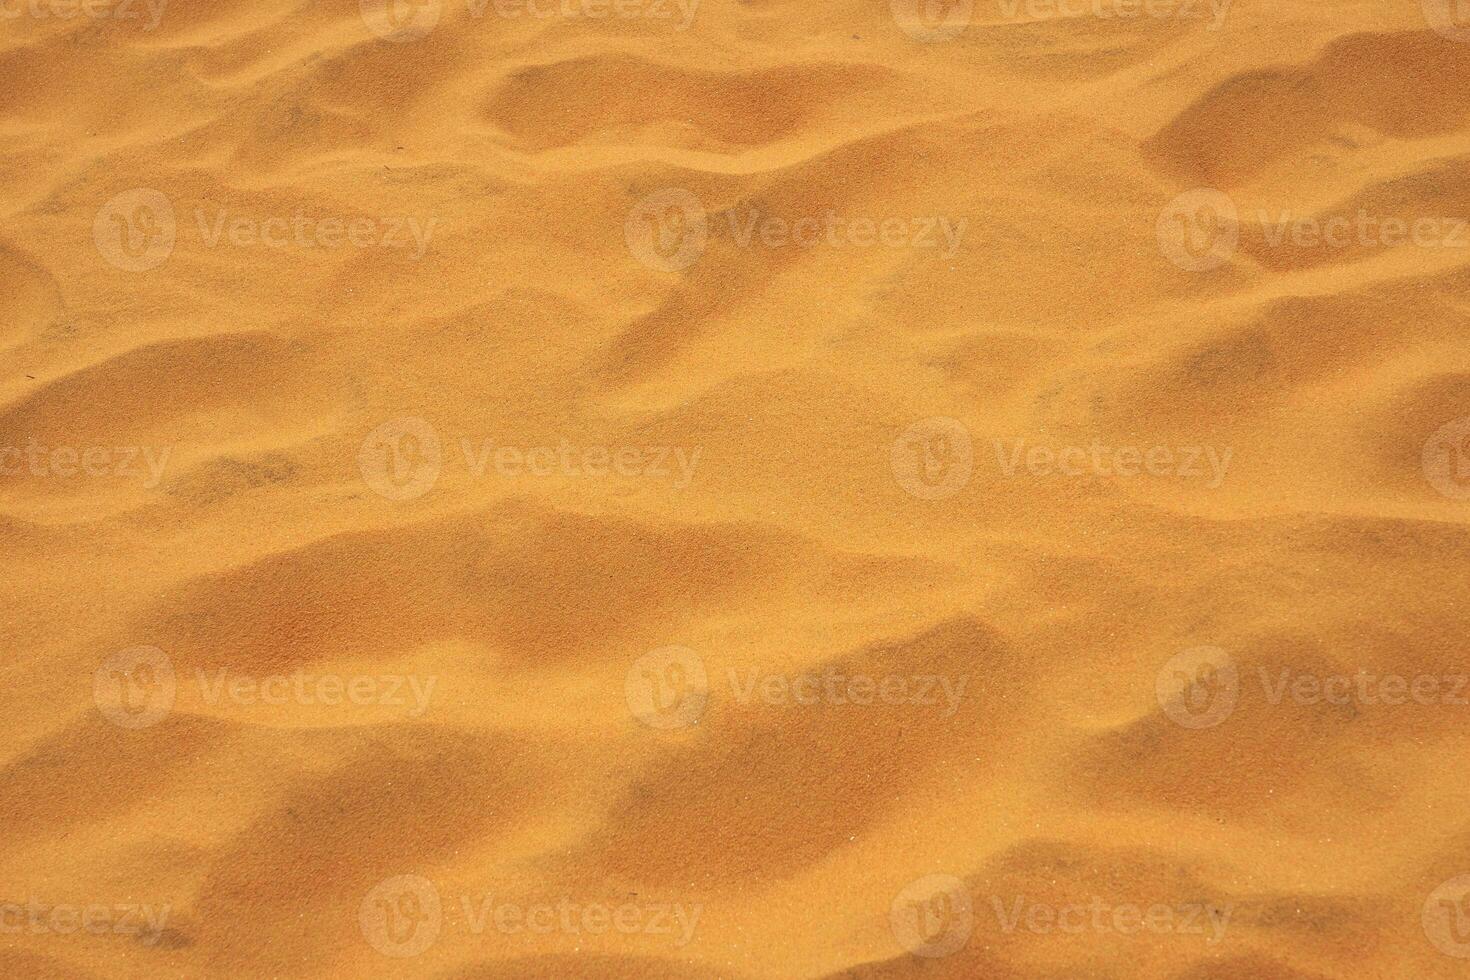 The texture of sand in the desert as a natural background. photo